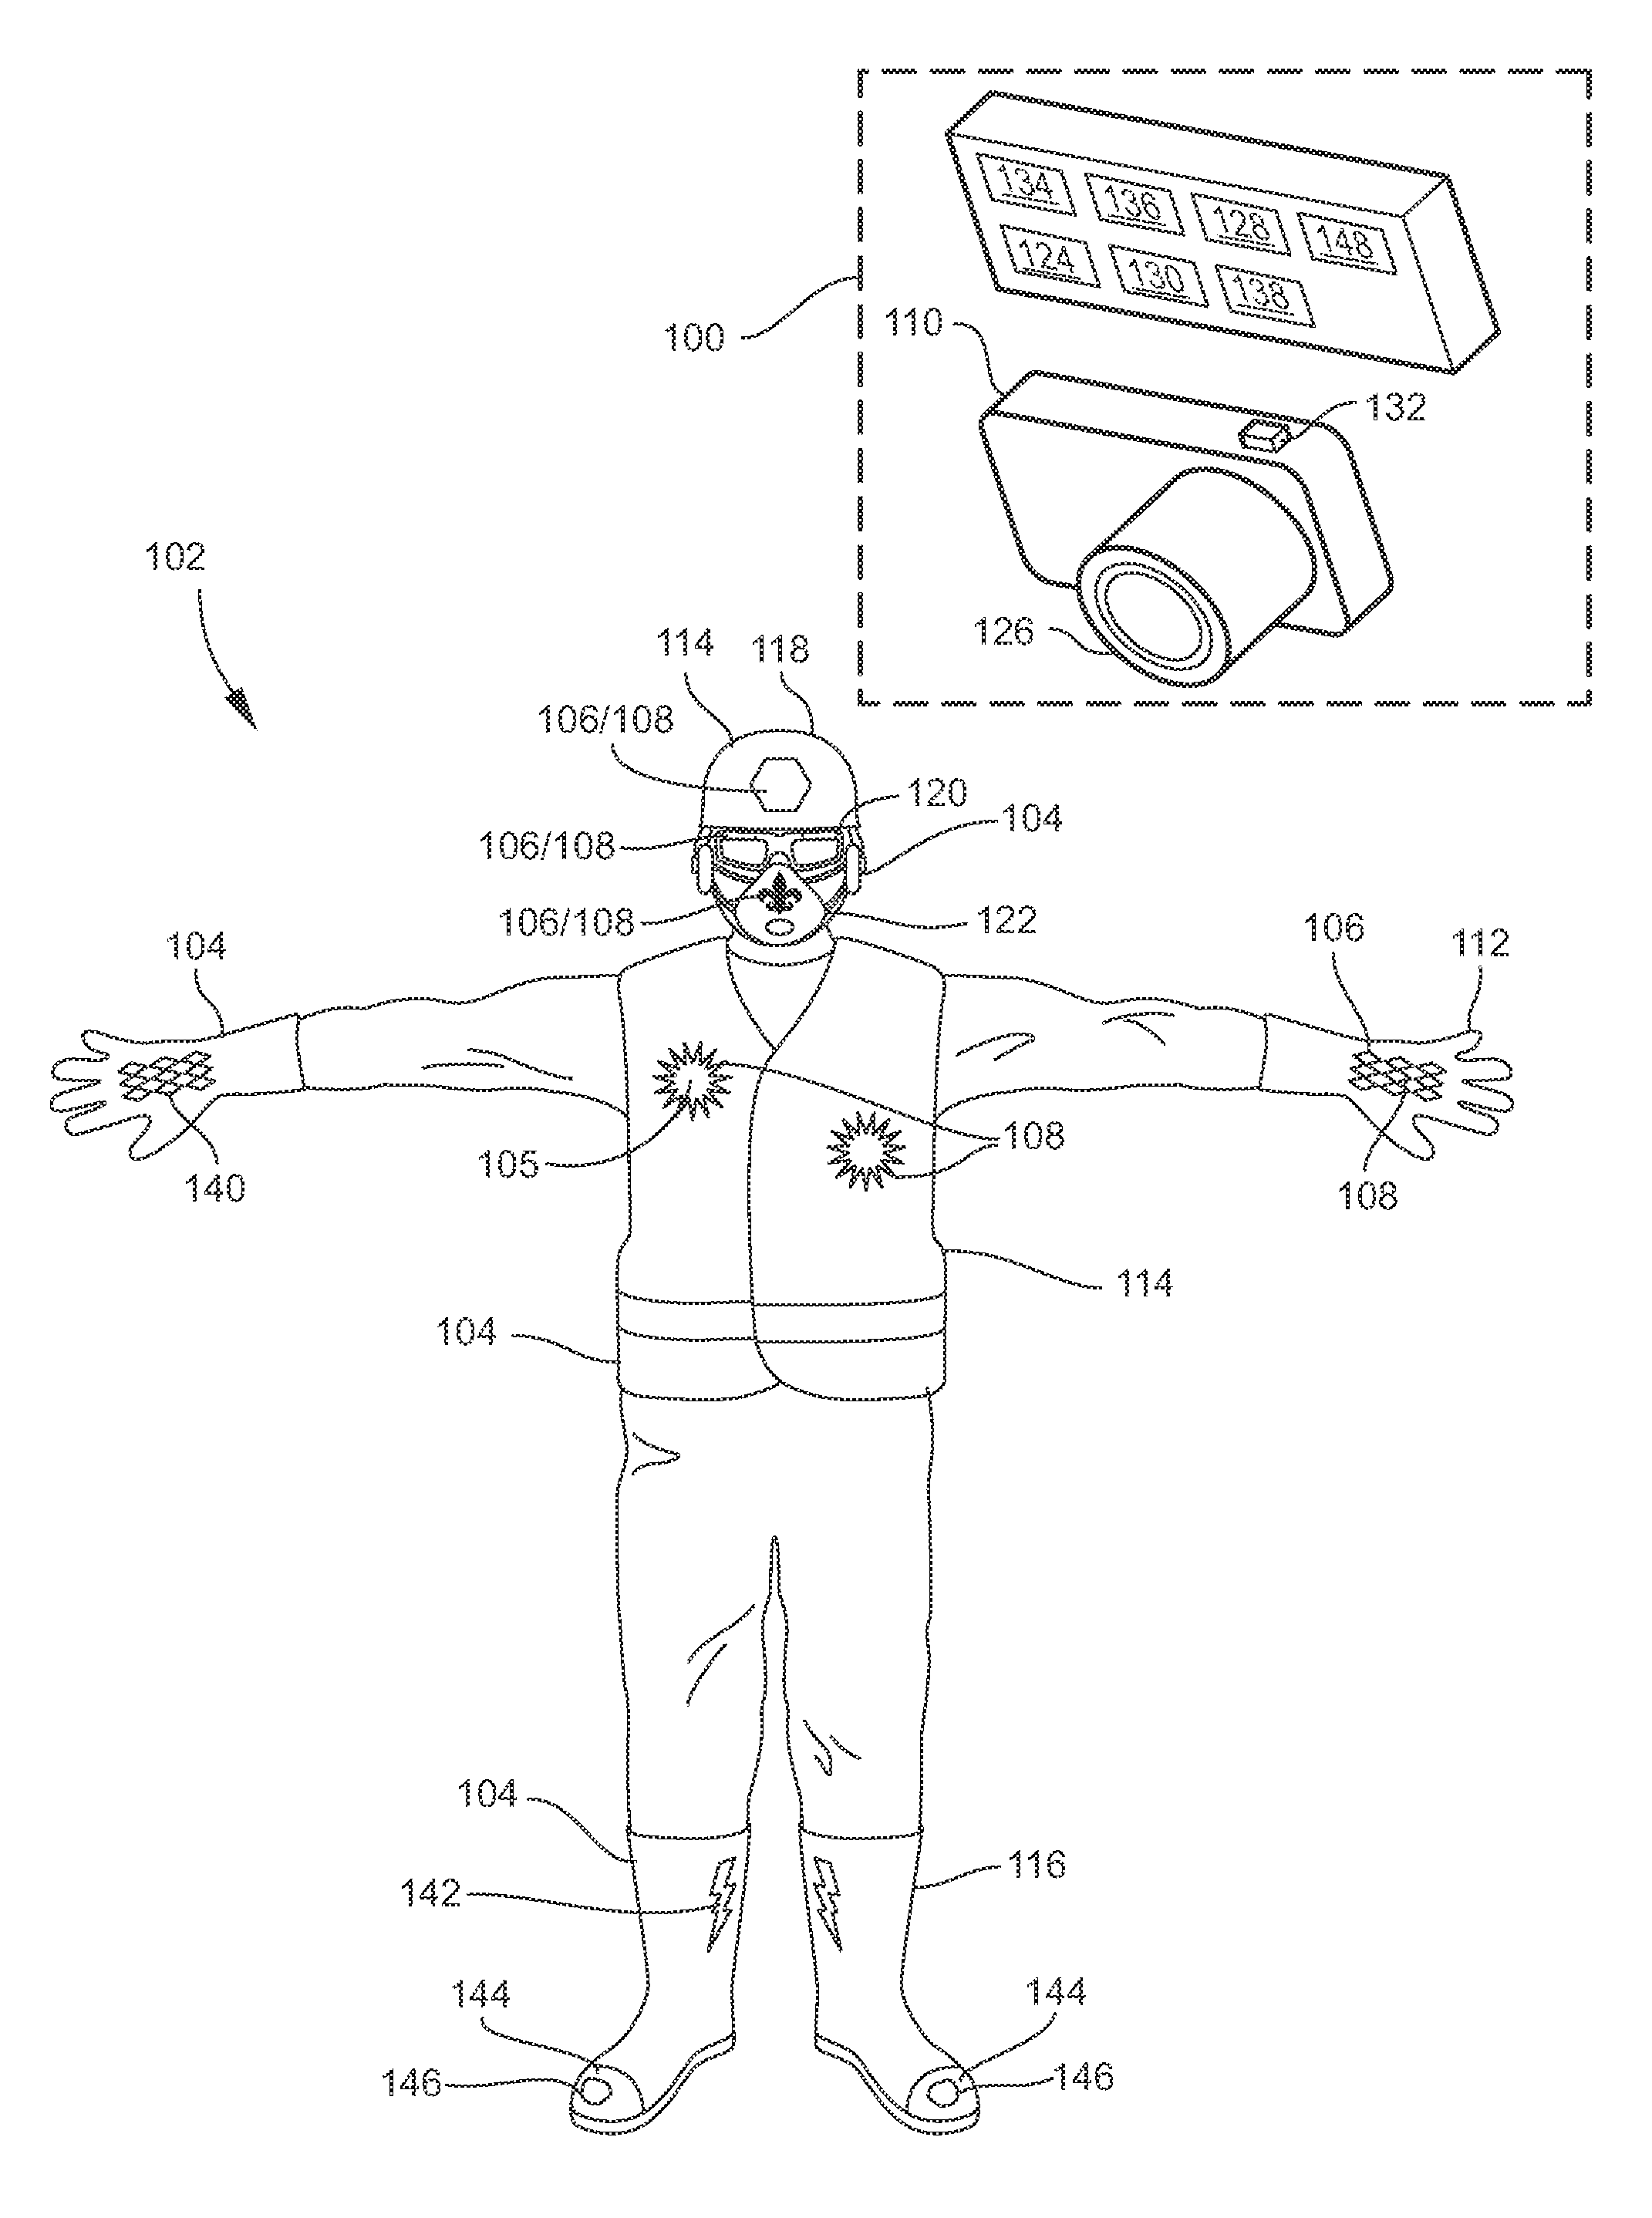 Systems and methods for monitoring personal protection equipment and promoting worker safety